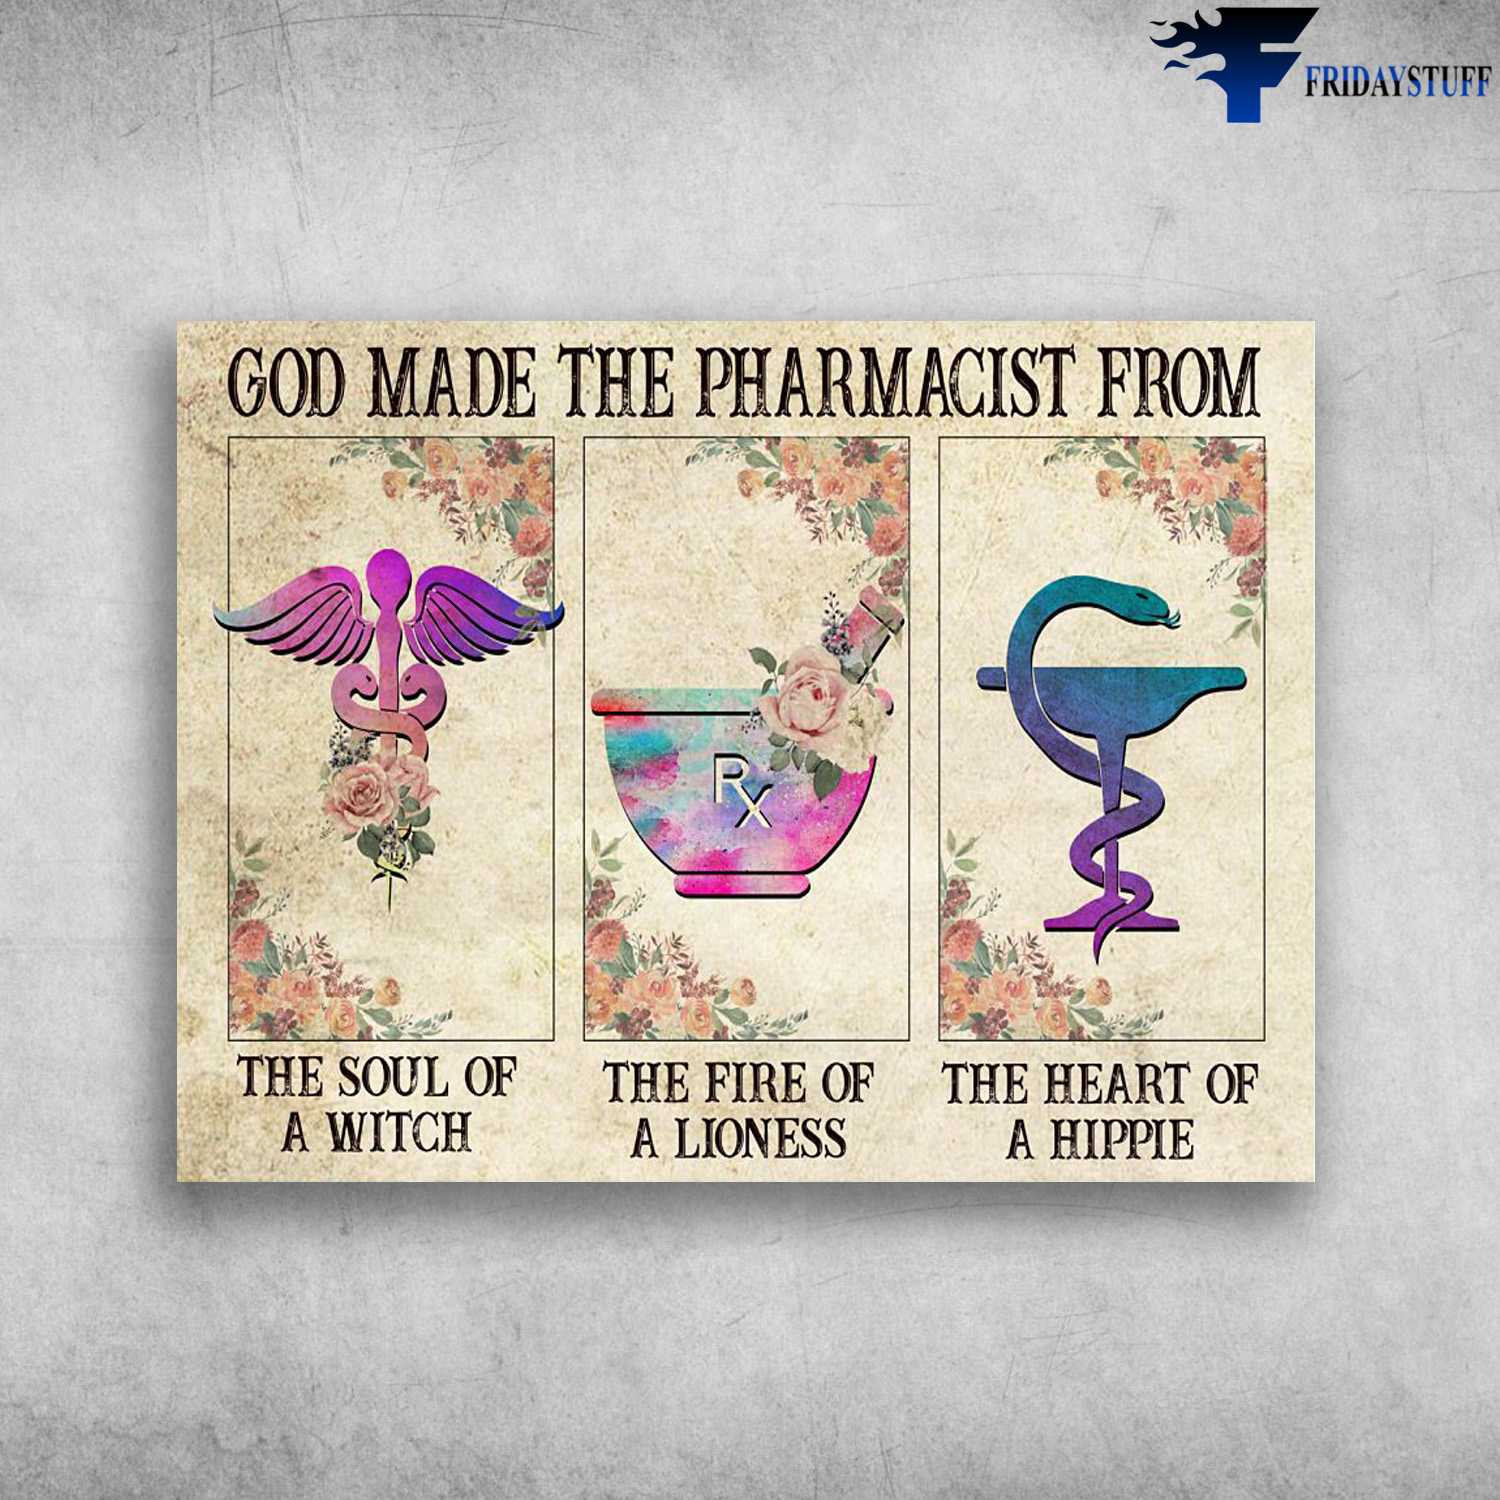 Pharmacist Poster, God Made The Pharmacist From, The Soul Of A Witch, The Fire Of A Lioness, The Heart Of A Hippie